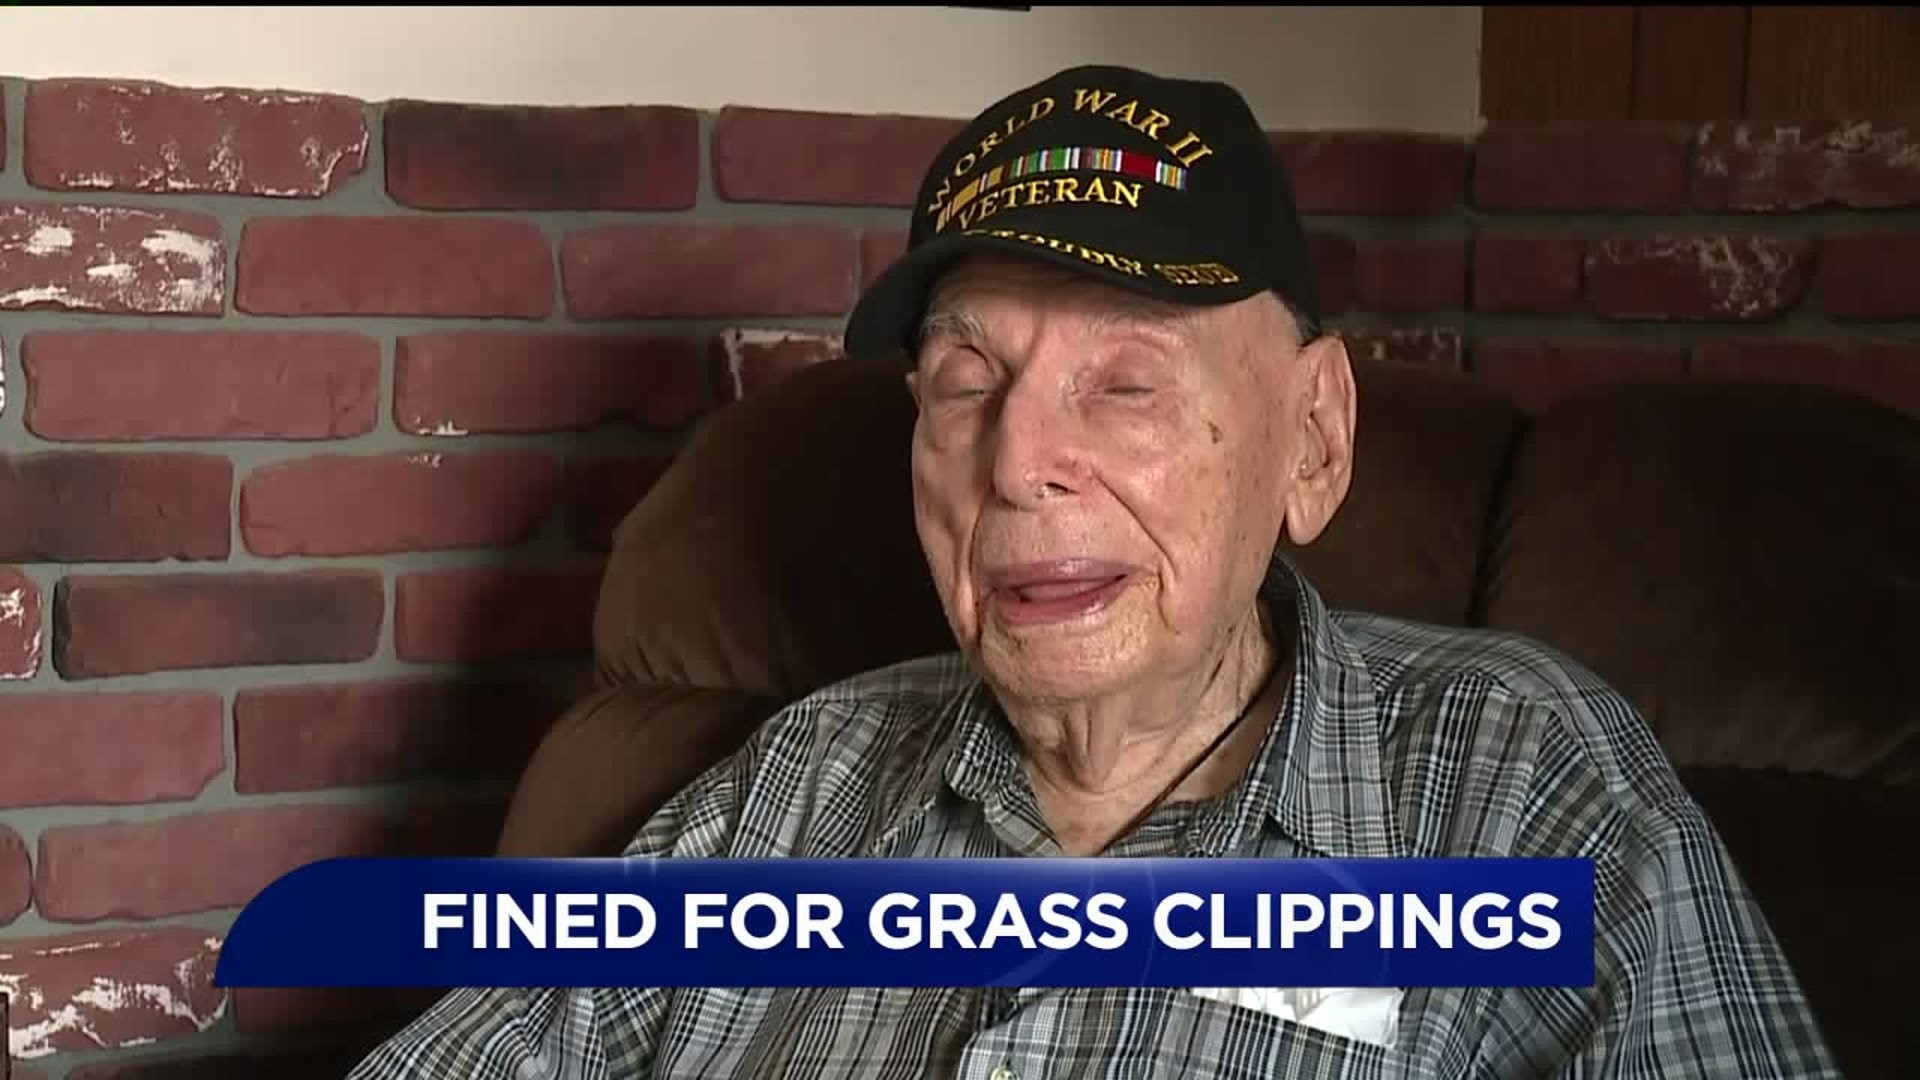 Elderly Man Fined for Grass Clippings Wants Warning